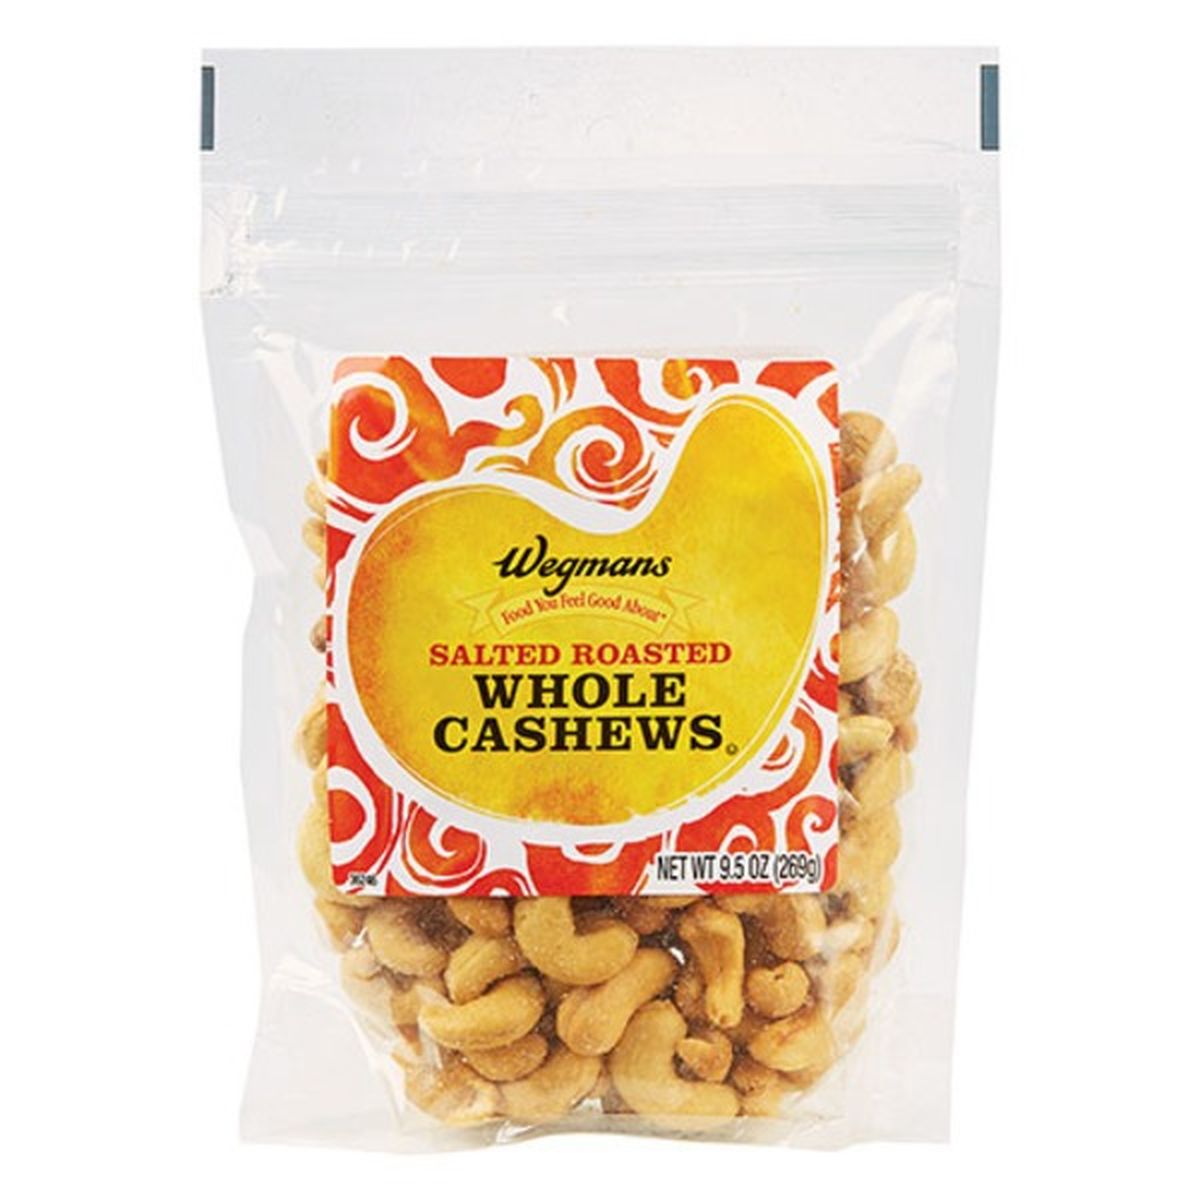 Calories in Wegmans Salted Roasted Whole Cashews